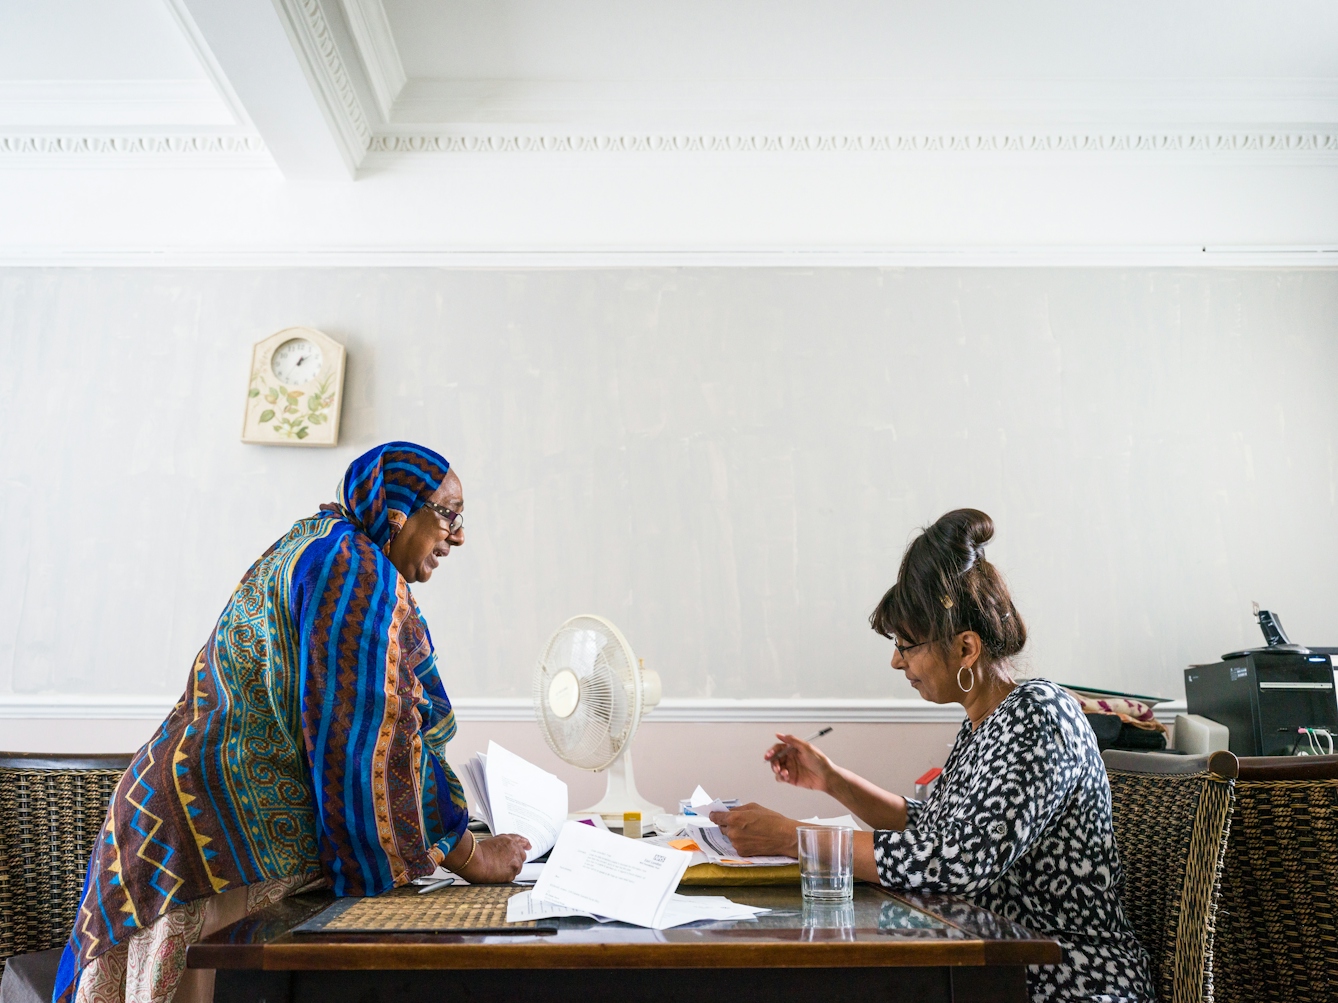 Photograph of Sarifa Patel with her personal assistant working at a table in her living room.